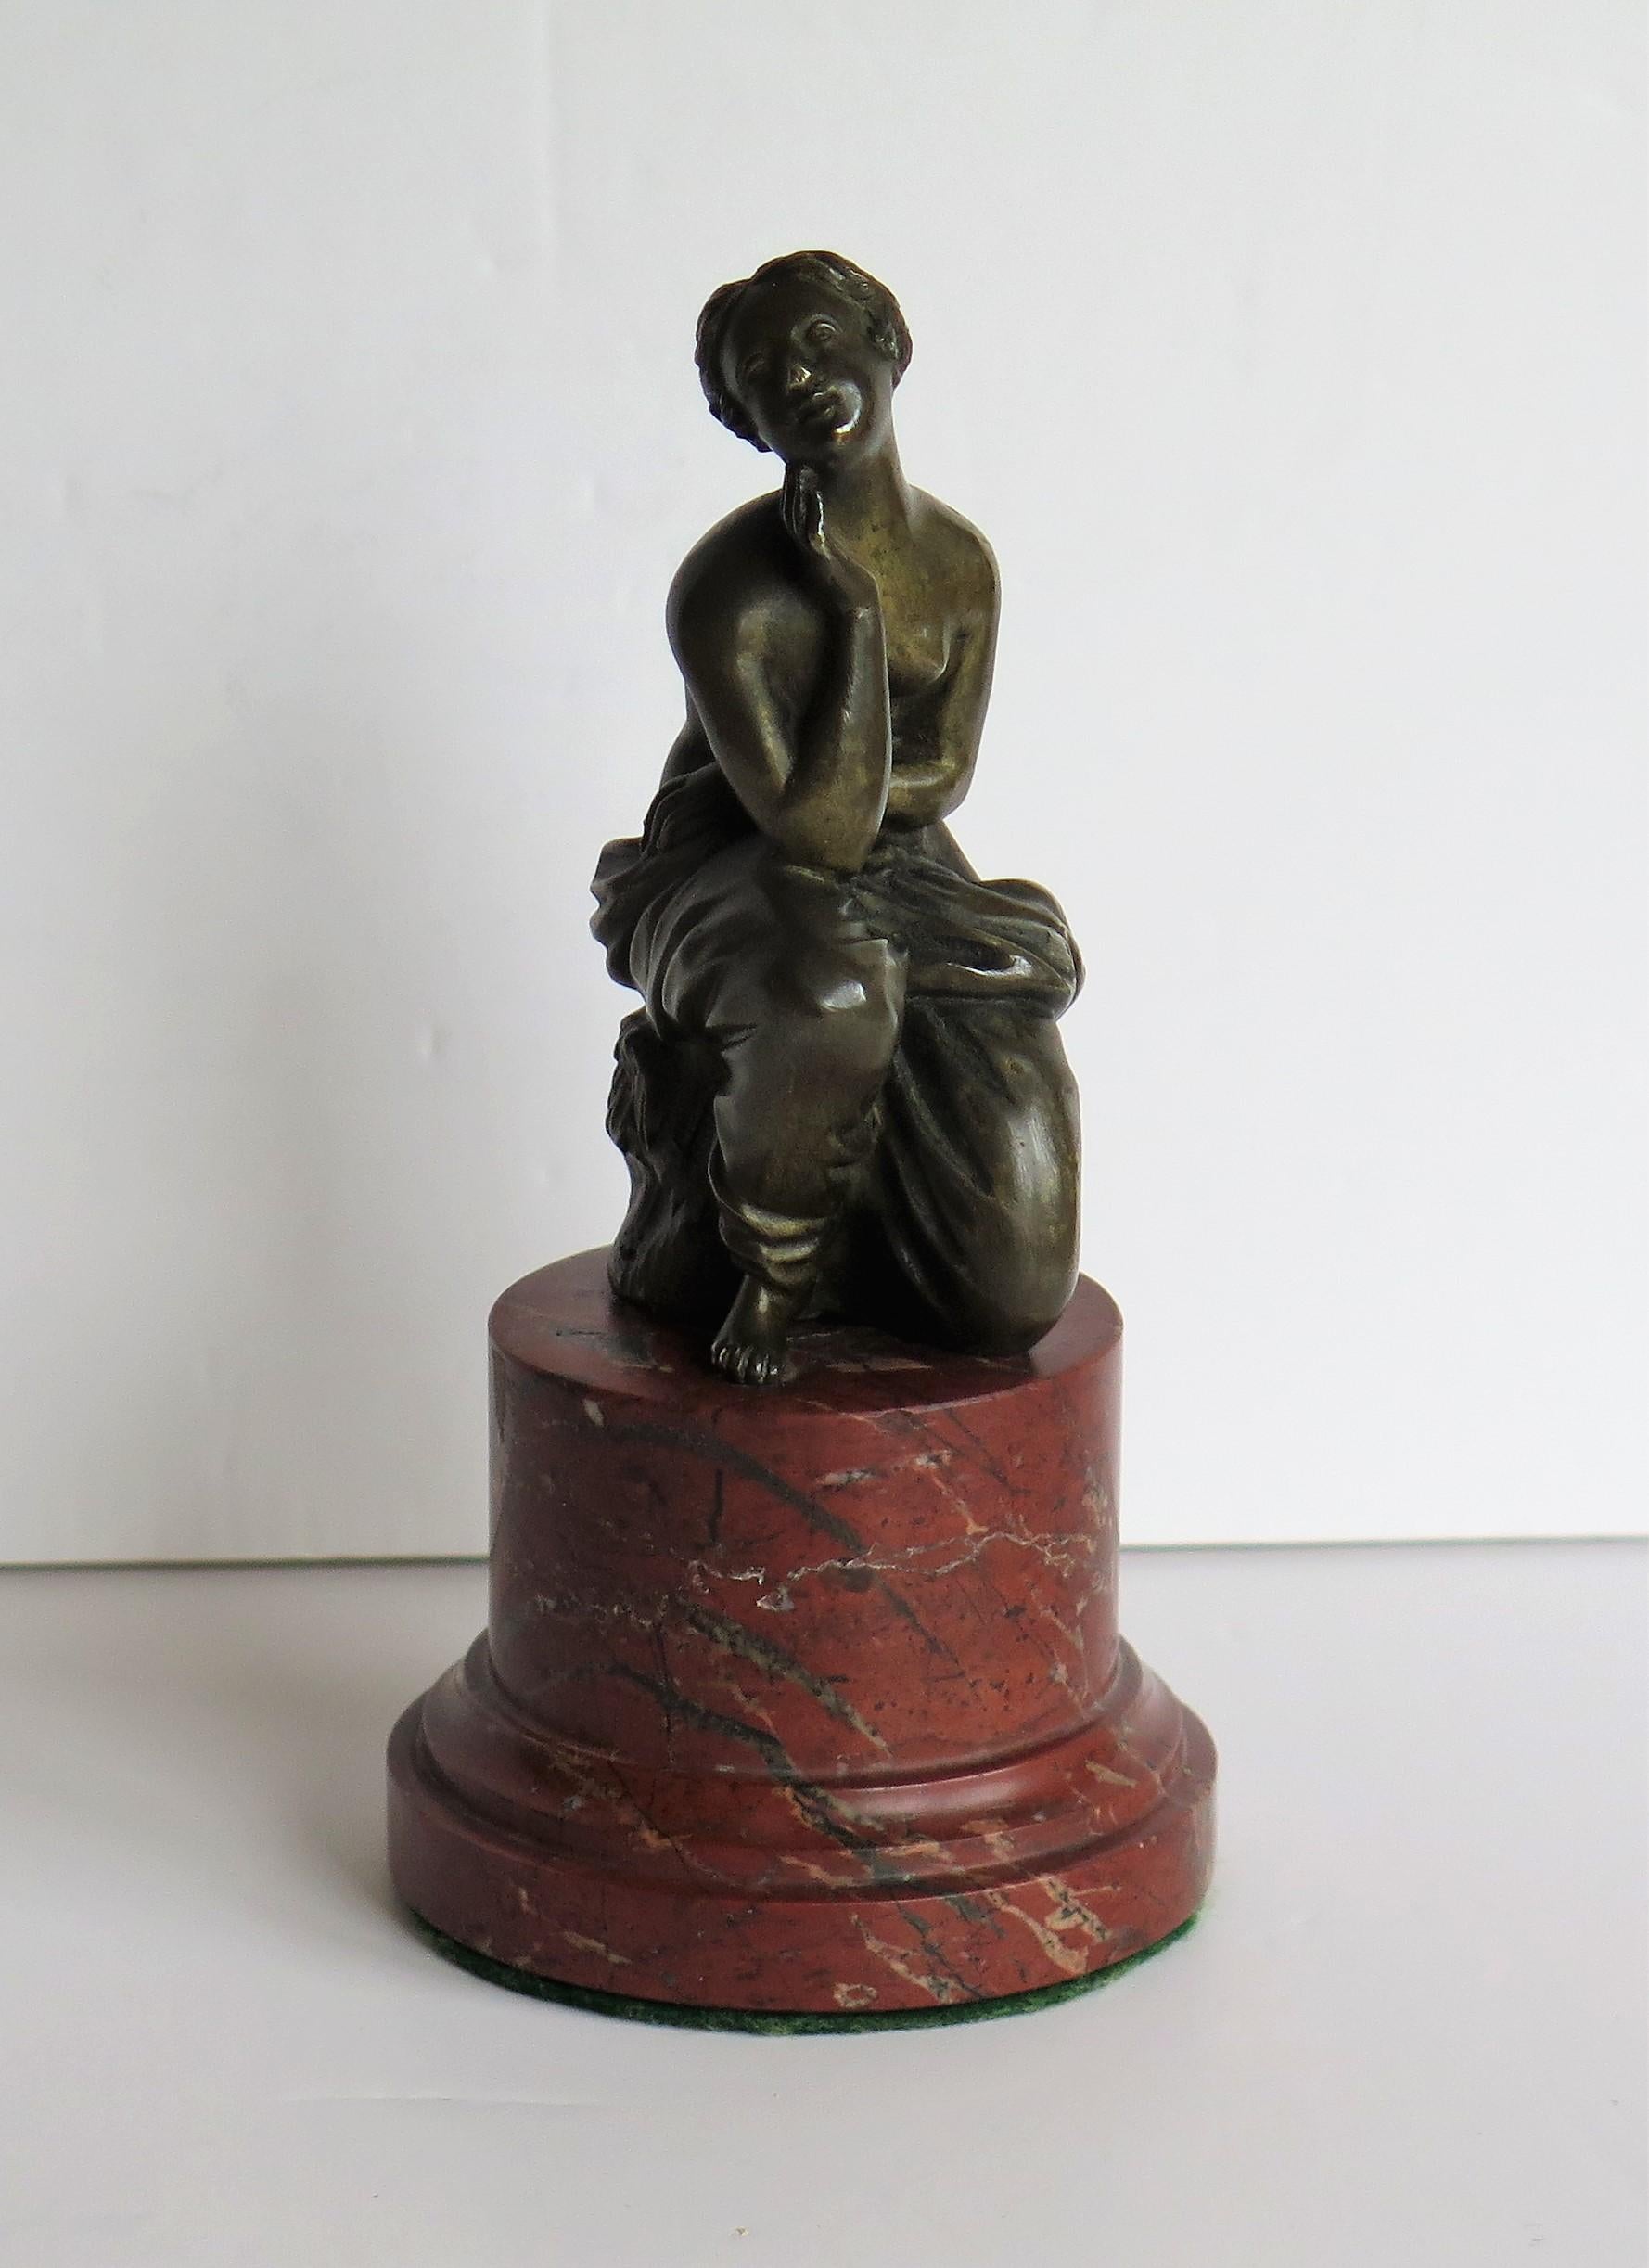 Hand-Crafted 19thC. Art Nouveau Bronze Sculpture of Lady on Red Marble Base, Probably French